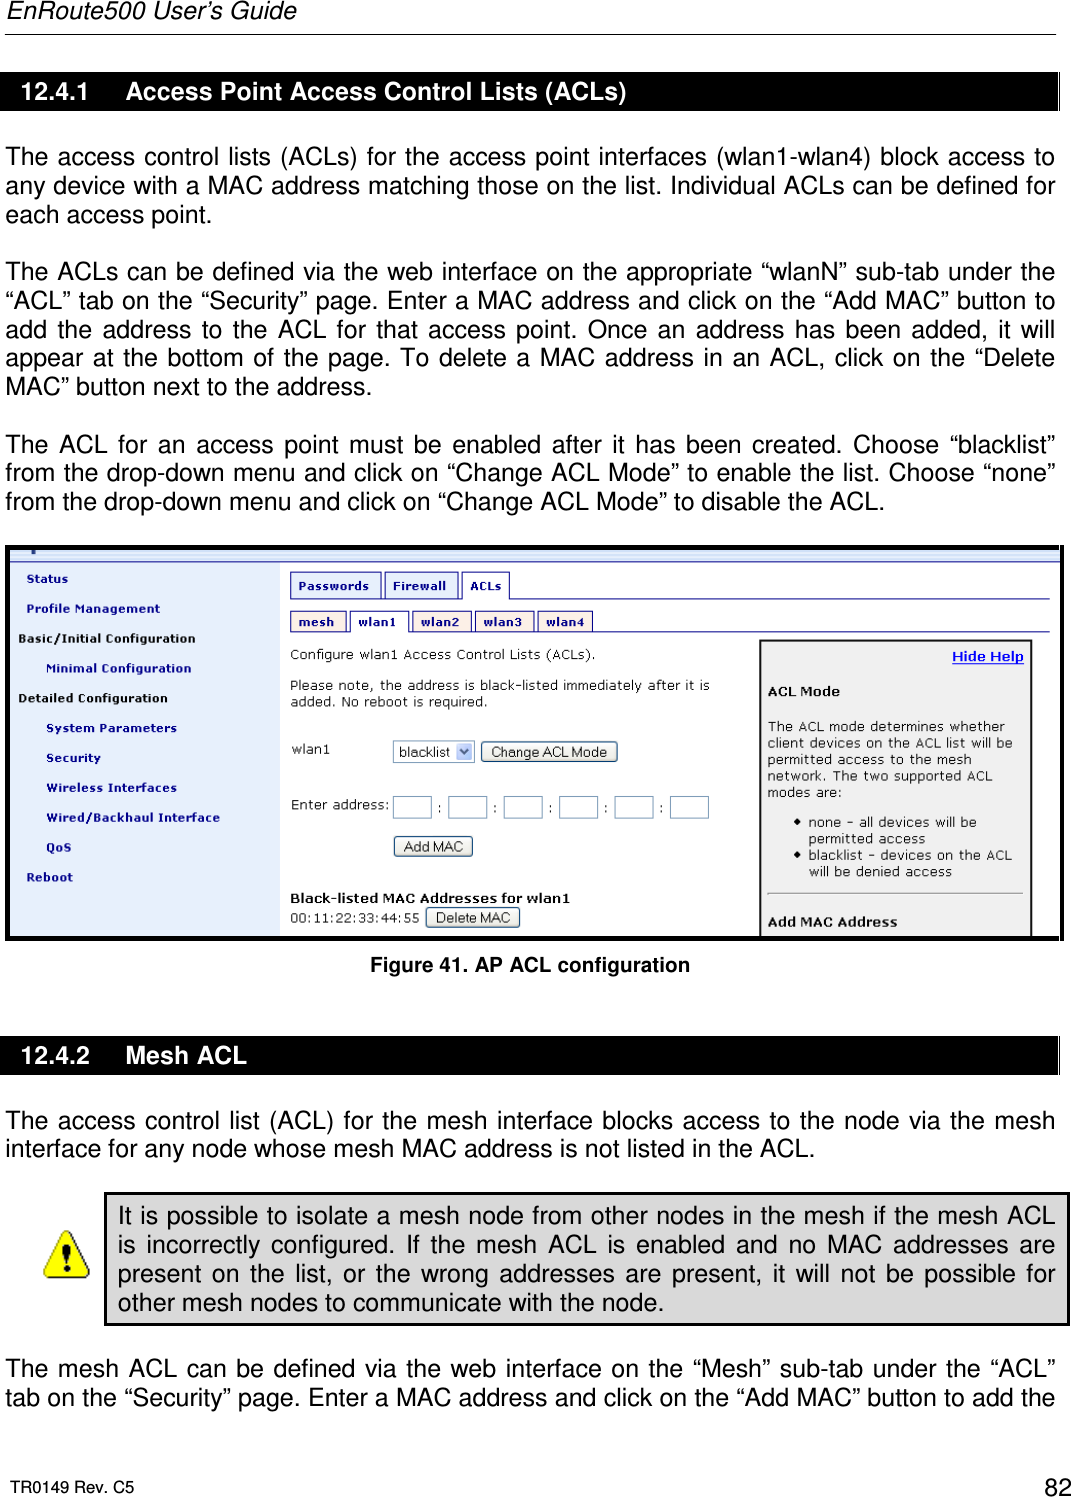 EnRoute500 User’s Guide  TR0149 Rev. C5  82 12.4.1  Access Point Access Control Lists (ACLs) The access control lists (ACLs) for the access point interfaces (wlan1-wlan4) block access to any device with a MAC address matching those on the list. Individual ACLs can be defined for each access point.  The ACLs can be defined via the web interface on the appropriate “wlanN” sub-tab under the “ACL” tab on the “Security” page. Enter a MAC address and click on the “Add MAC” button to add  the  address  to  the  ACL  for  that  access point.  Once  an  address has  been  added,  it  will appear at the bottom of the page. To delete a  MAC address in an ACL, click on  the “Delete MAC” button next to the address.  The  ACL  for  an  access  point  must  be  enabled  after  it  has  been  created.  Choose  “blacklist” from the drop-down menu and click on “Change ACL Mode” to enable the list. Choose “none” from the drop-down menu and click on “Change ACL Mode” to disable the ACL.   Figure 41. AP ACL configuration 12.4.2  Mesh ACL The access control list (ACL) for the mesh interface blocks access to the node via the mesh interface for any node whose mesh MAC address is not listed in the ACL.  It is possible to isolate a mesh node from other nodes in the mesh if the mesh ACL is  incorrectly  configured.  If  the  mesh  ACL  is  enabled  and  no  MAC  addresses  are present  on  the  list,  or  the  wrong  addresses  are  present,  it  will  not  be  possible  for other mesh nodes to communicate with the node.  The mesh ACL can be defined via the web interface on the “Mesh” sub-tab under the “ACL” tab on the “Security” page. Enter a MAC address and click on the “Add MAC” button to add the 